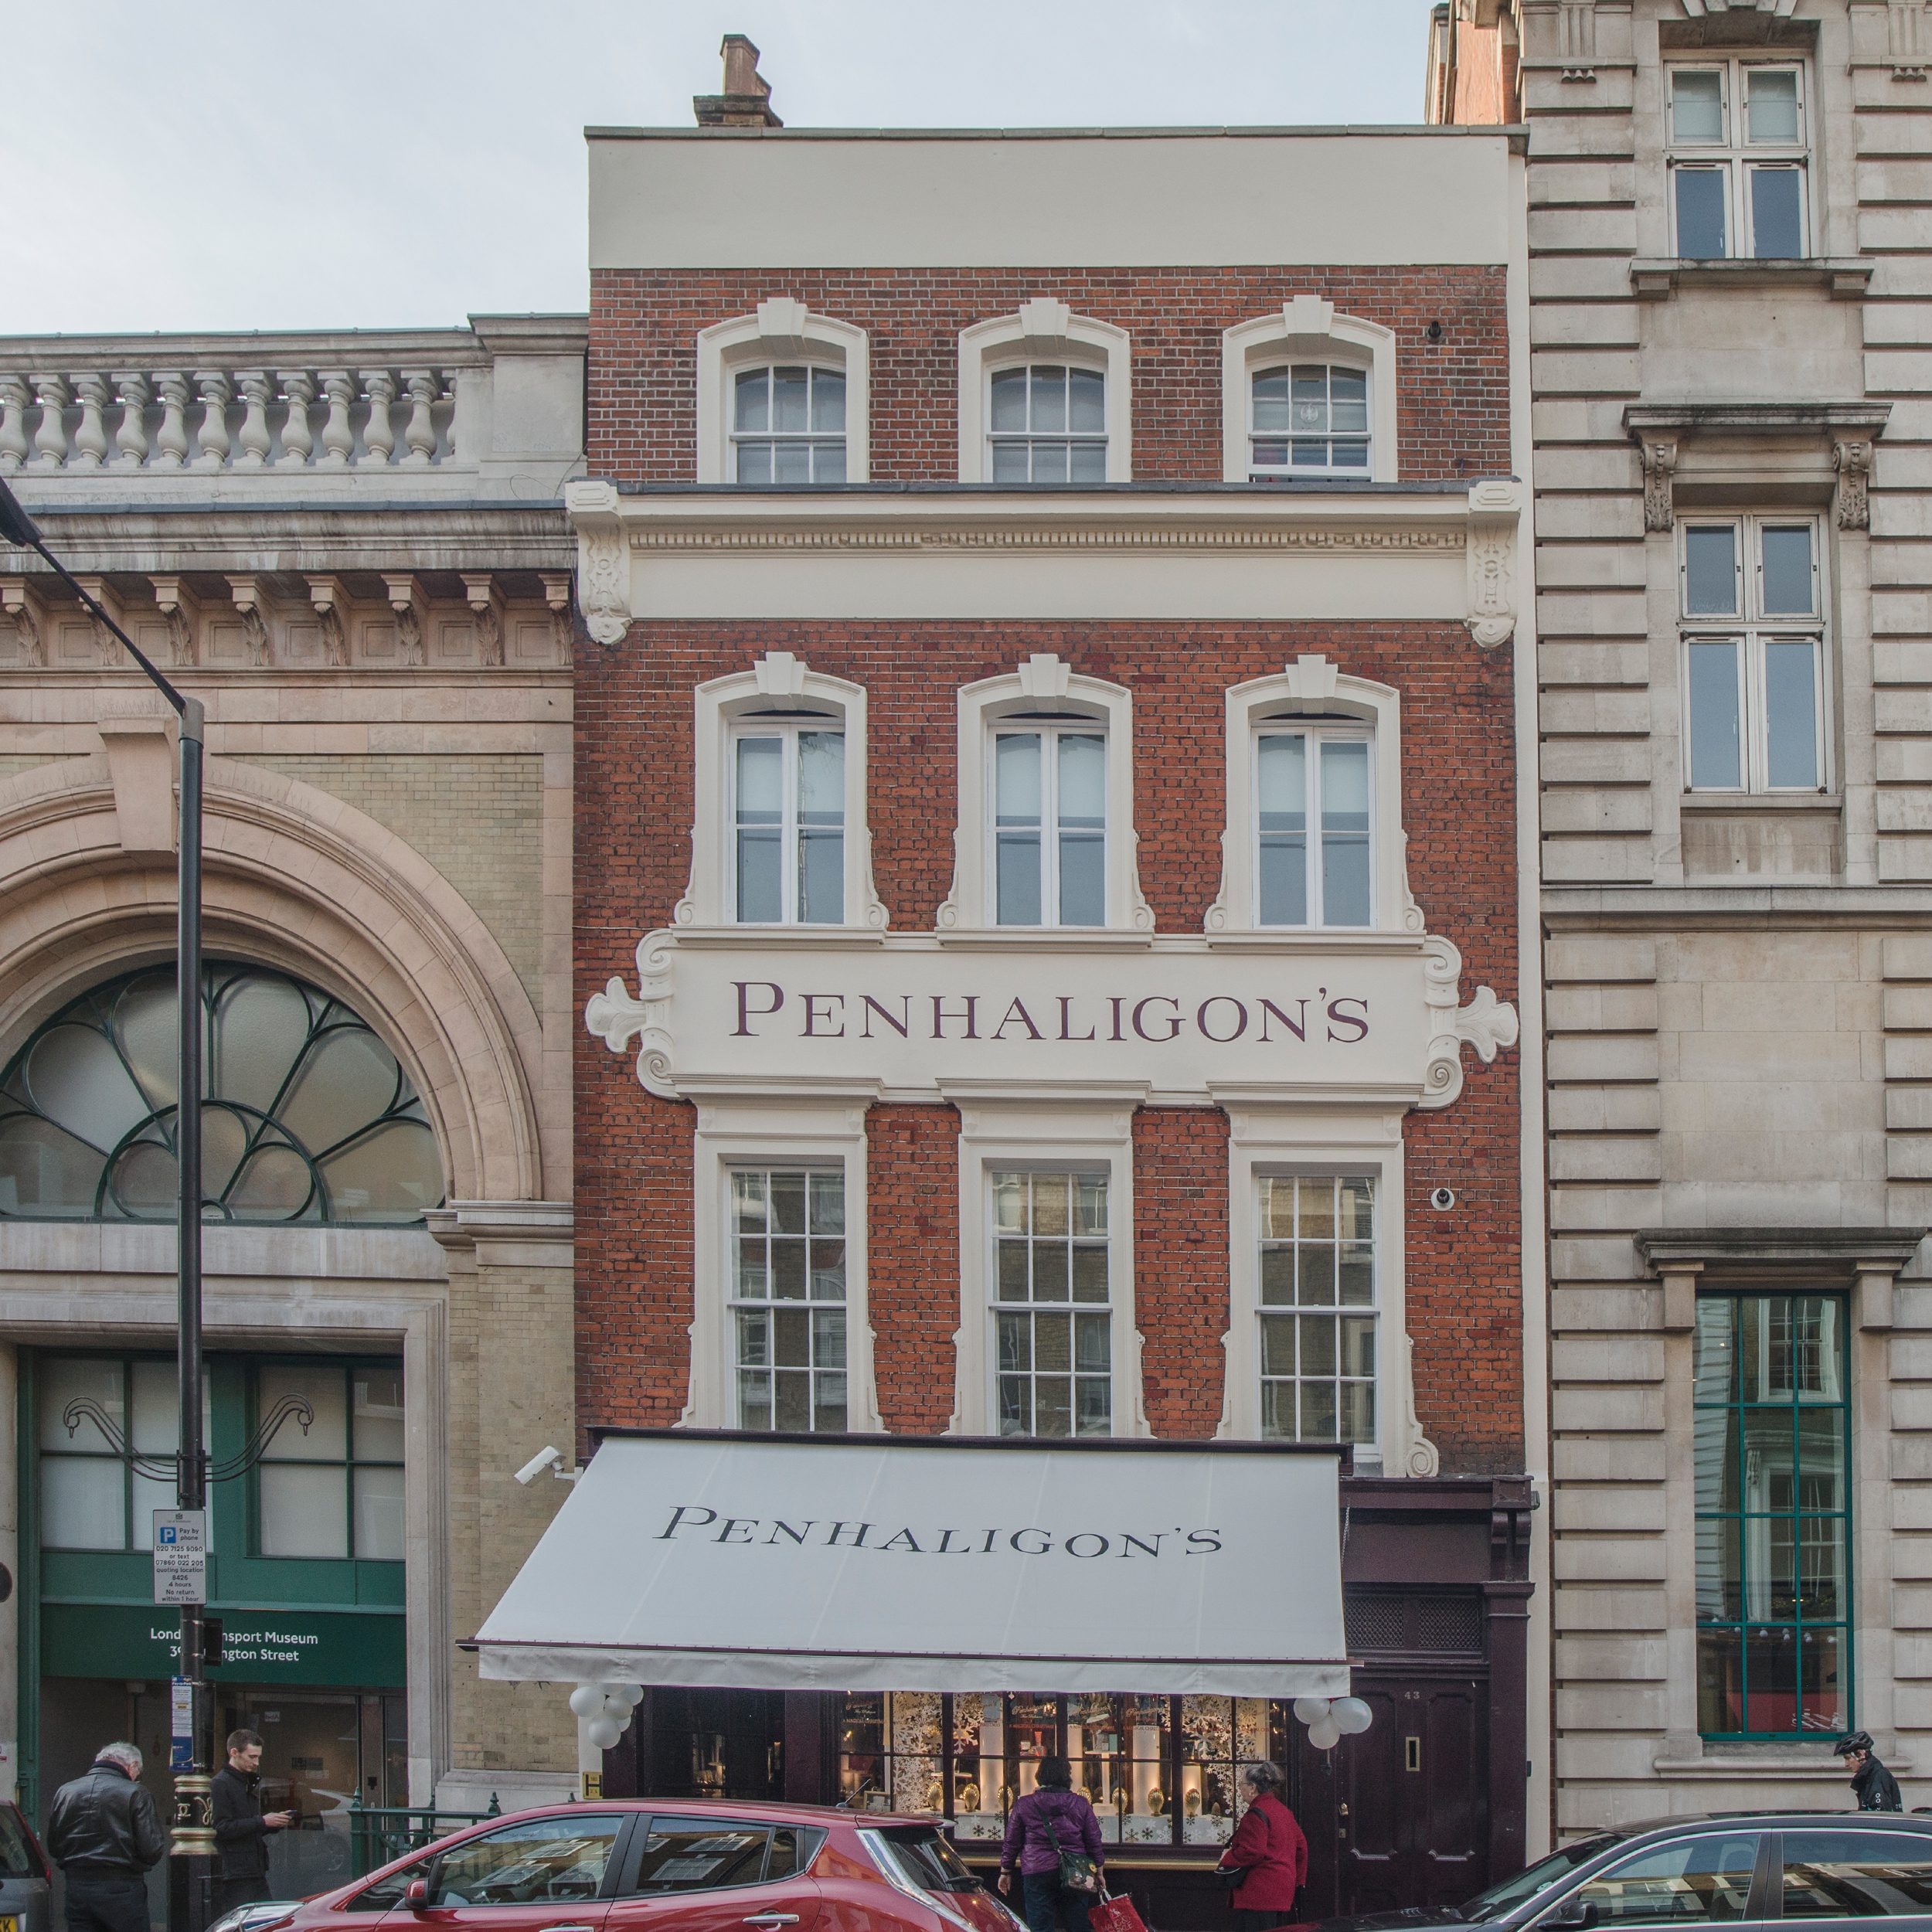 Large windows and a sign front the heritage perfumer penhaligons